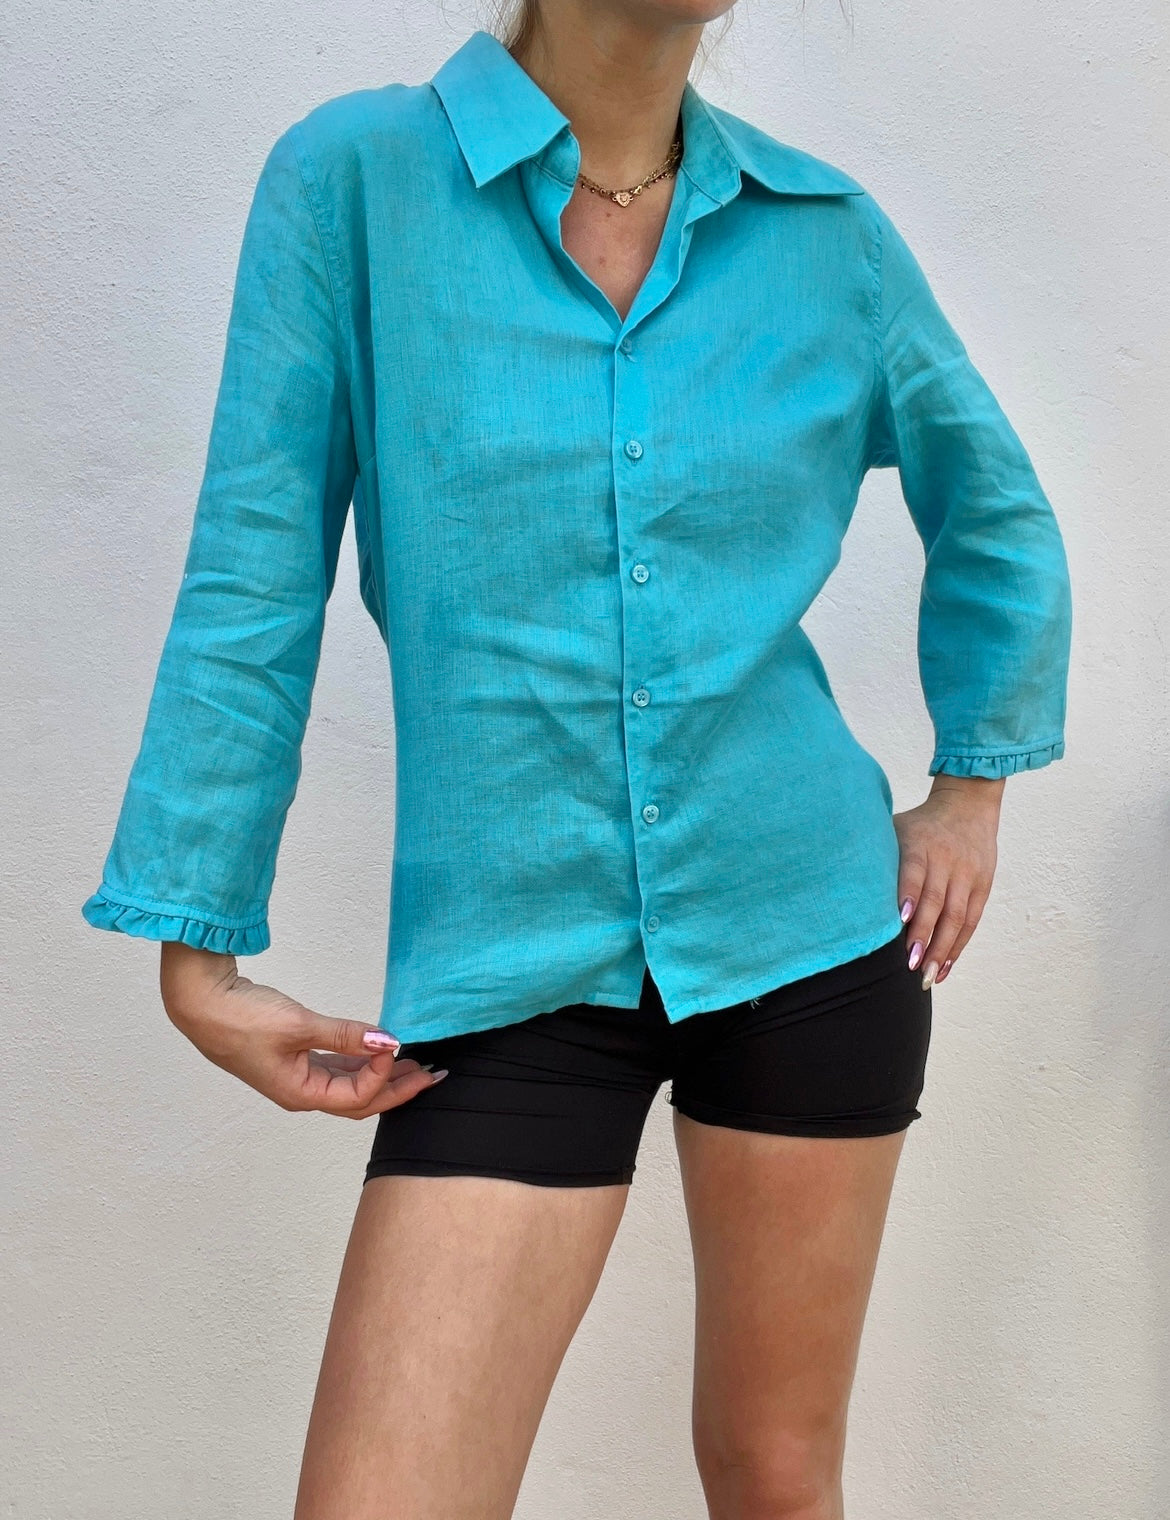 Chemise turquoise oversize vintage 80s Taille M